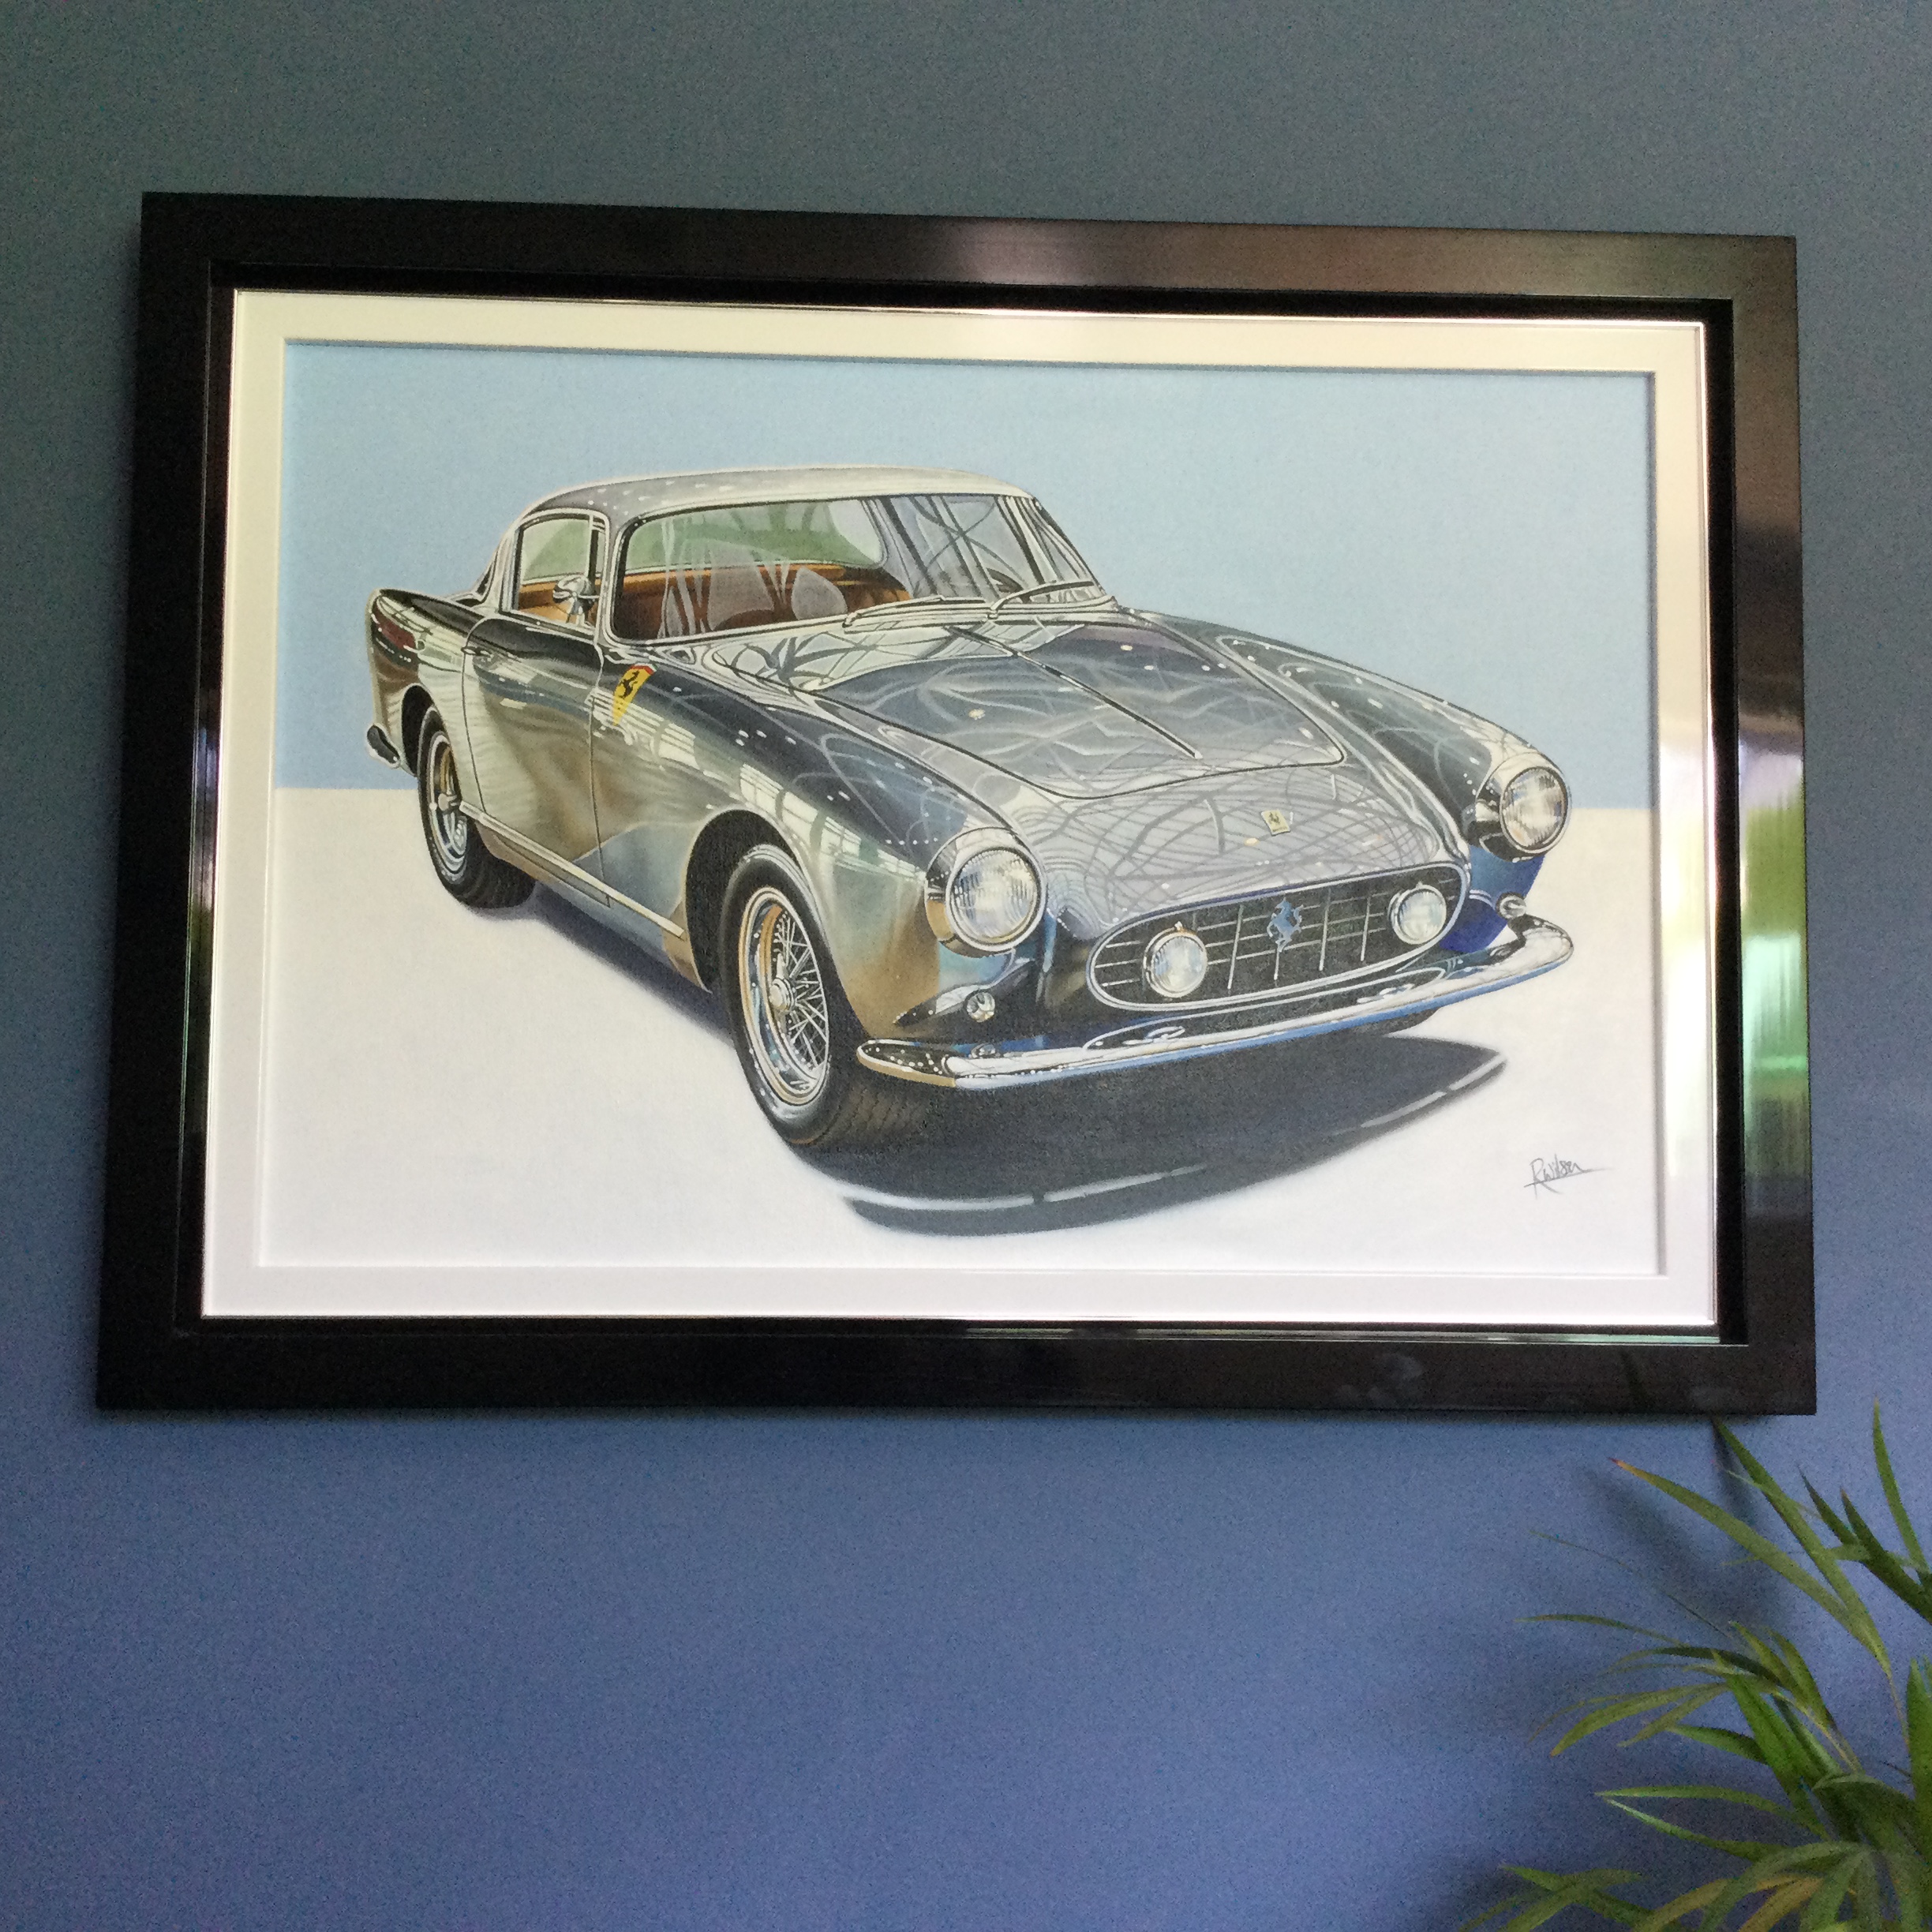 “Ferrari 250 GT Coupe” by Roz Wilson